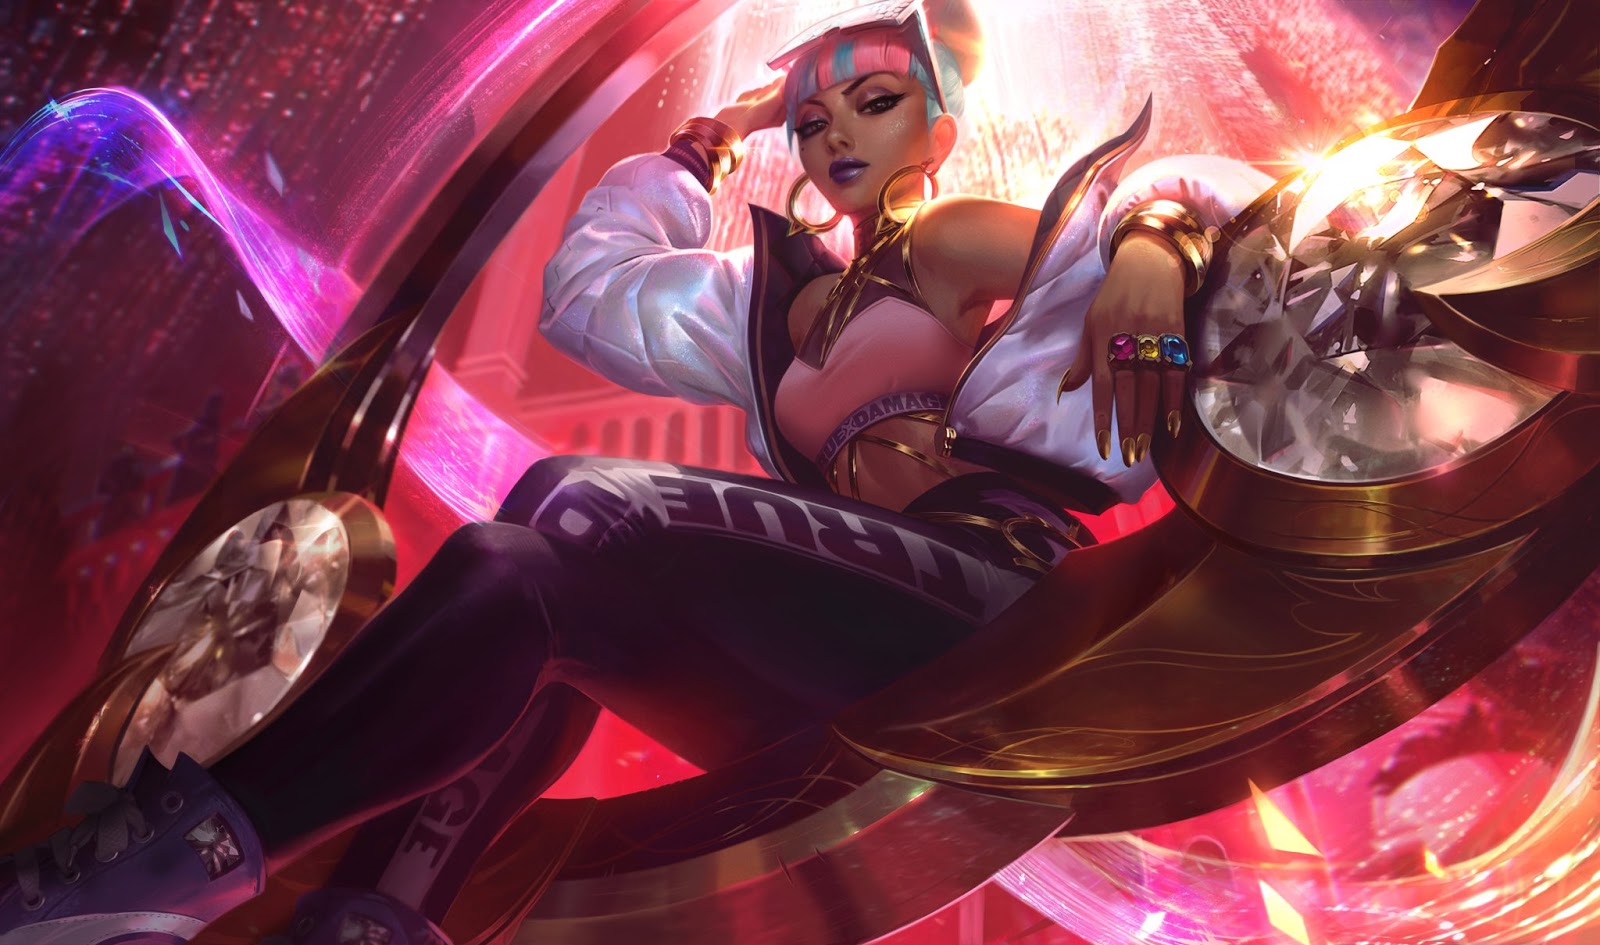 League's new True Damage skins take center stage in Patch 9.22